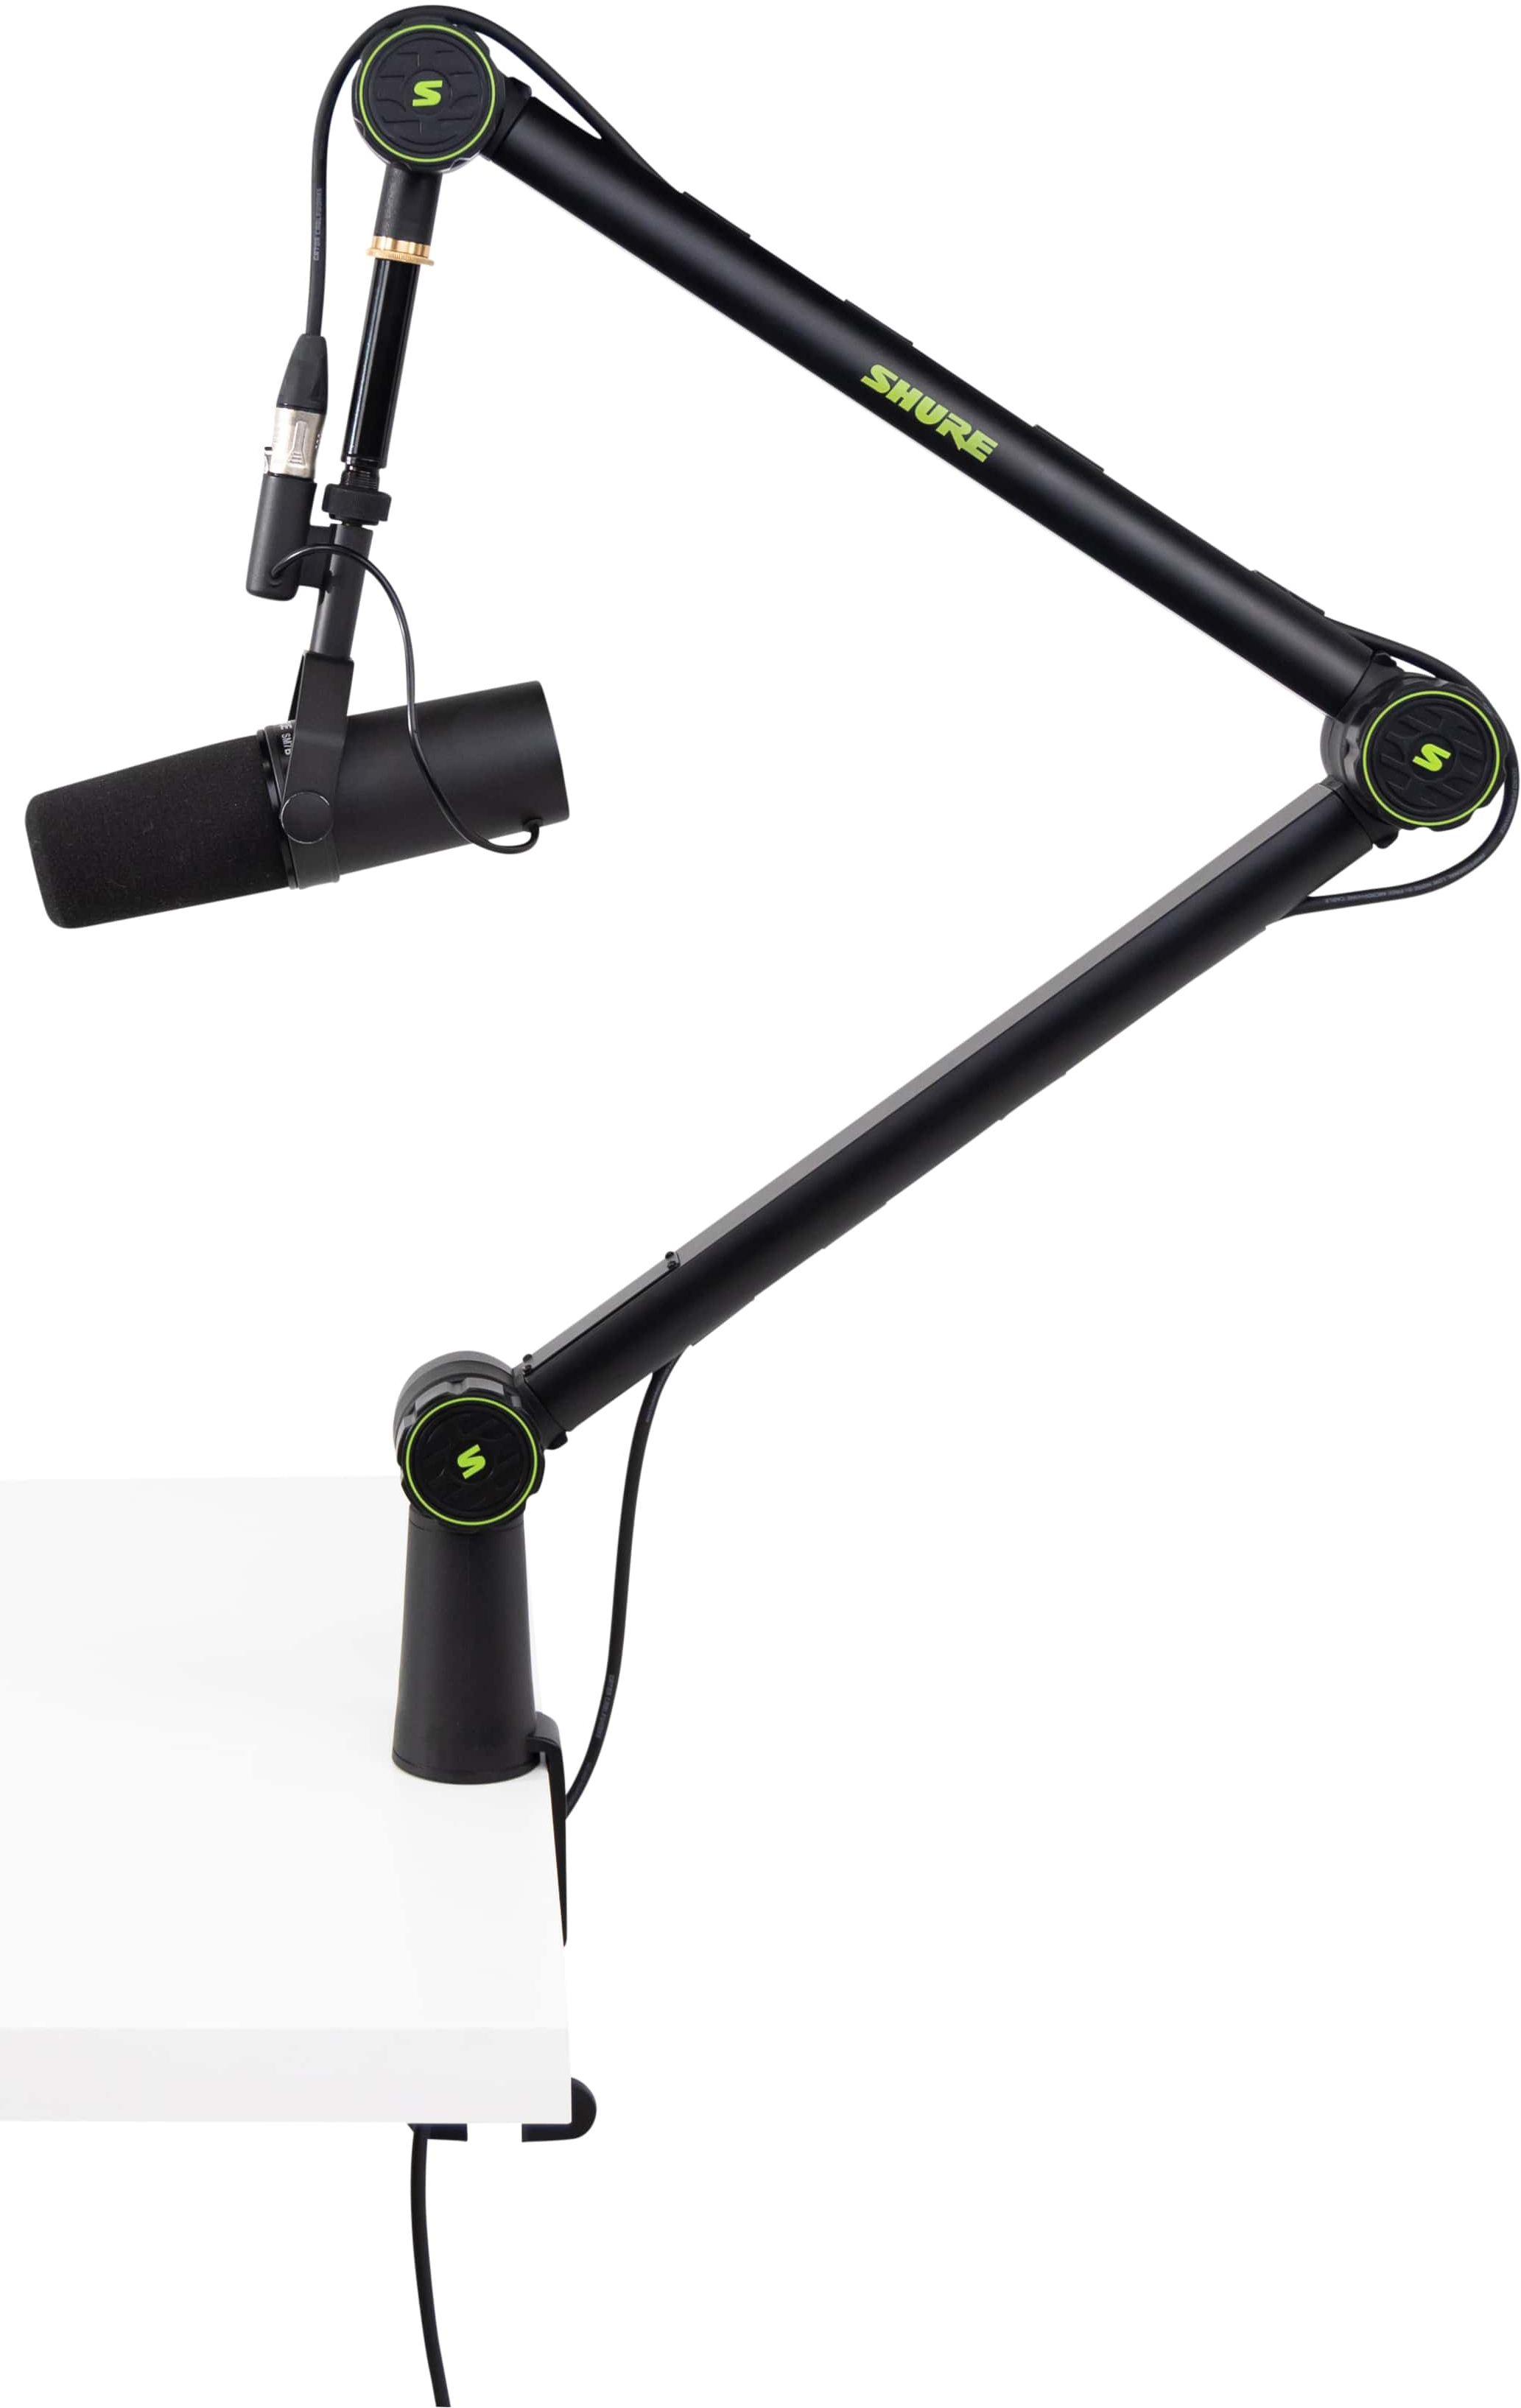 Gator Frameworks Bras Articule A Pince Deluxe Pour Micro - Microphone stand - Main picture